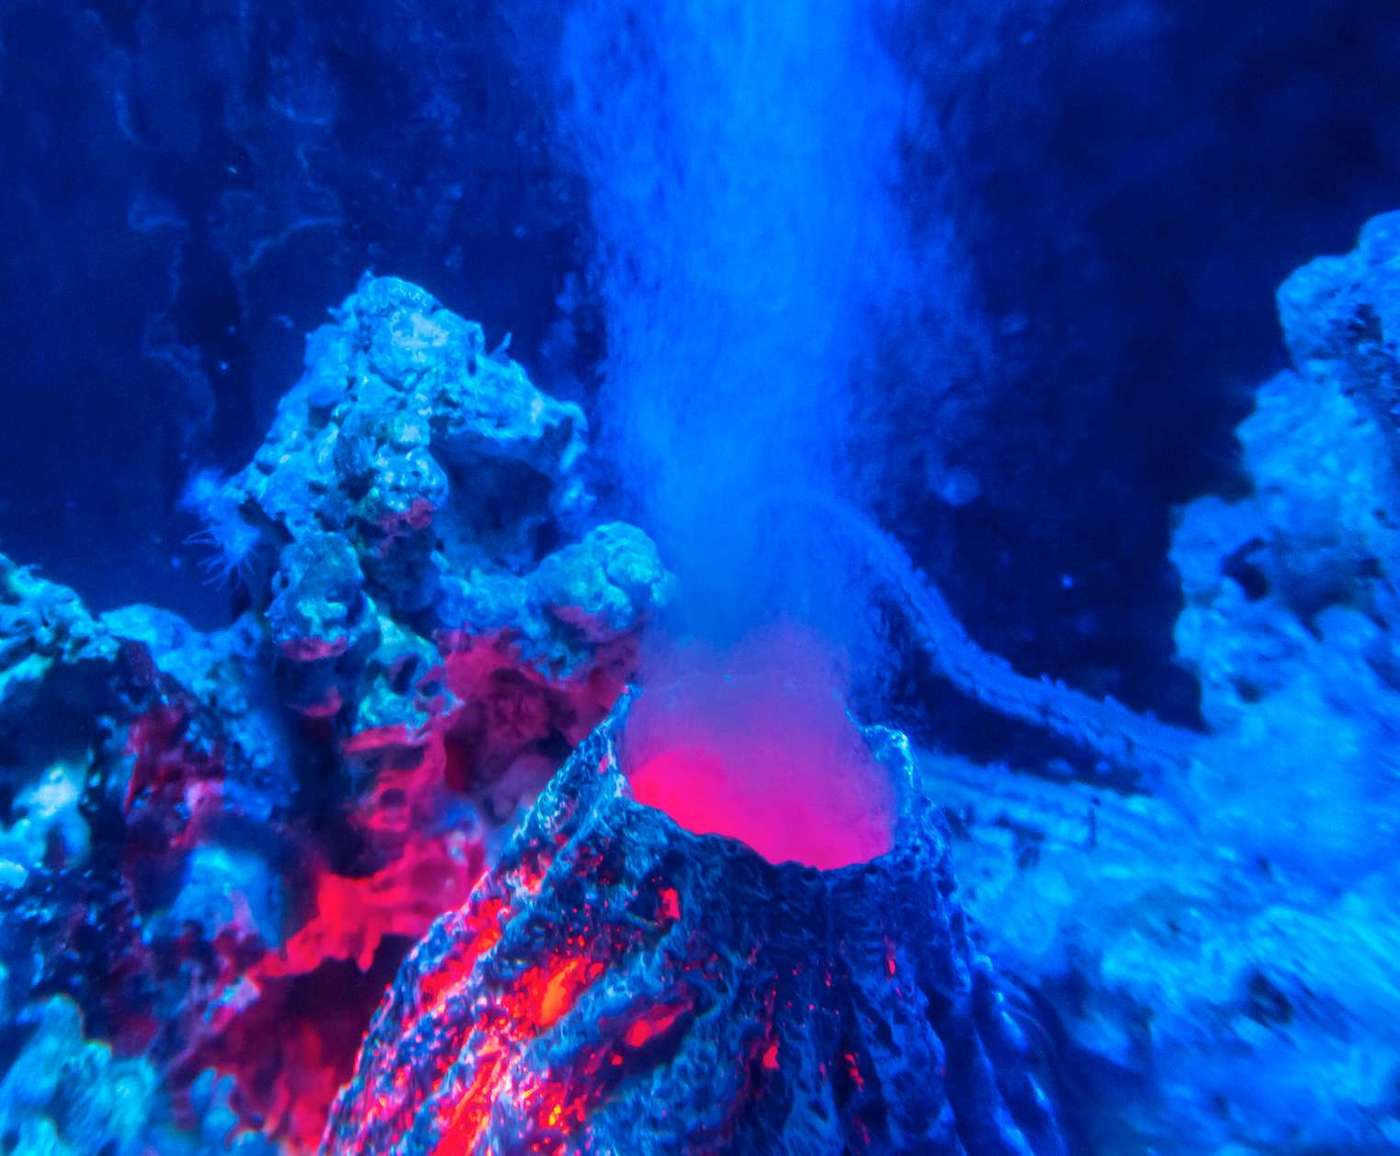 Underwater volcanoes might be harnessed for U.S. power needs